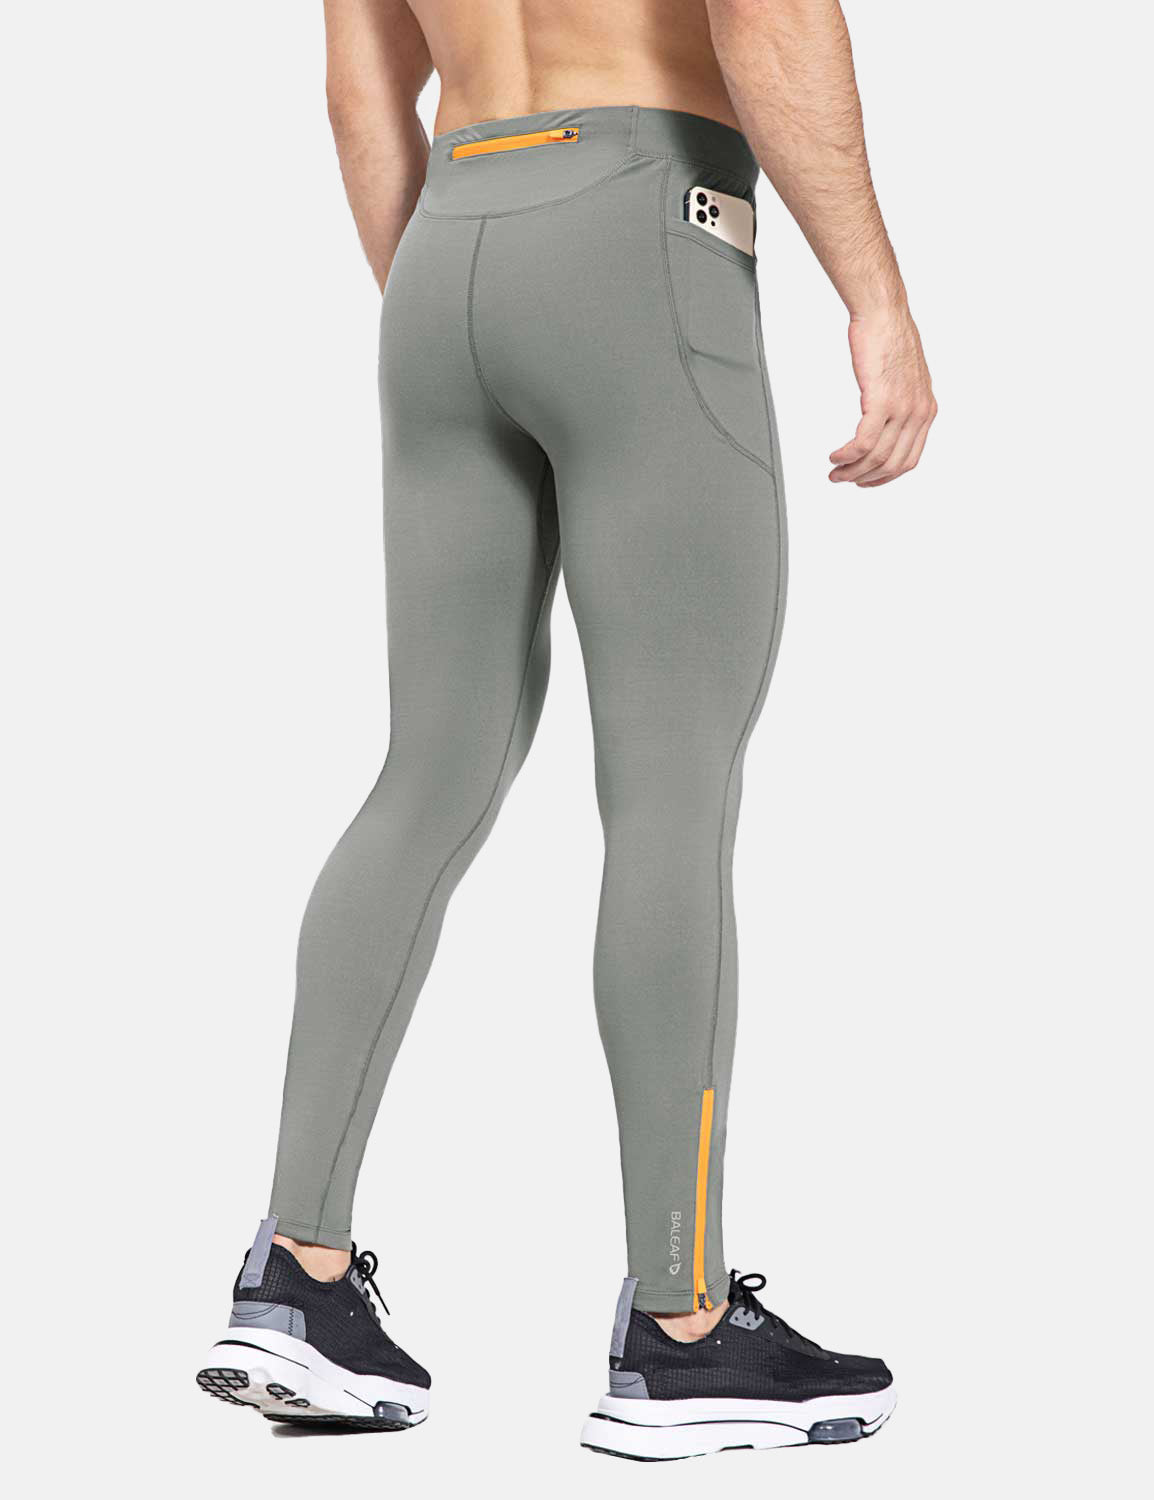 Baleaf Men's Laureate 29" Thermal Water-Resistant Tights cbd048 Frost Gray Back